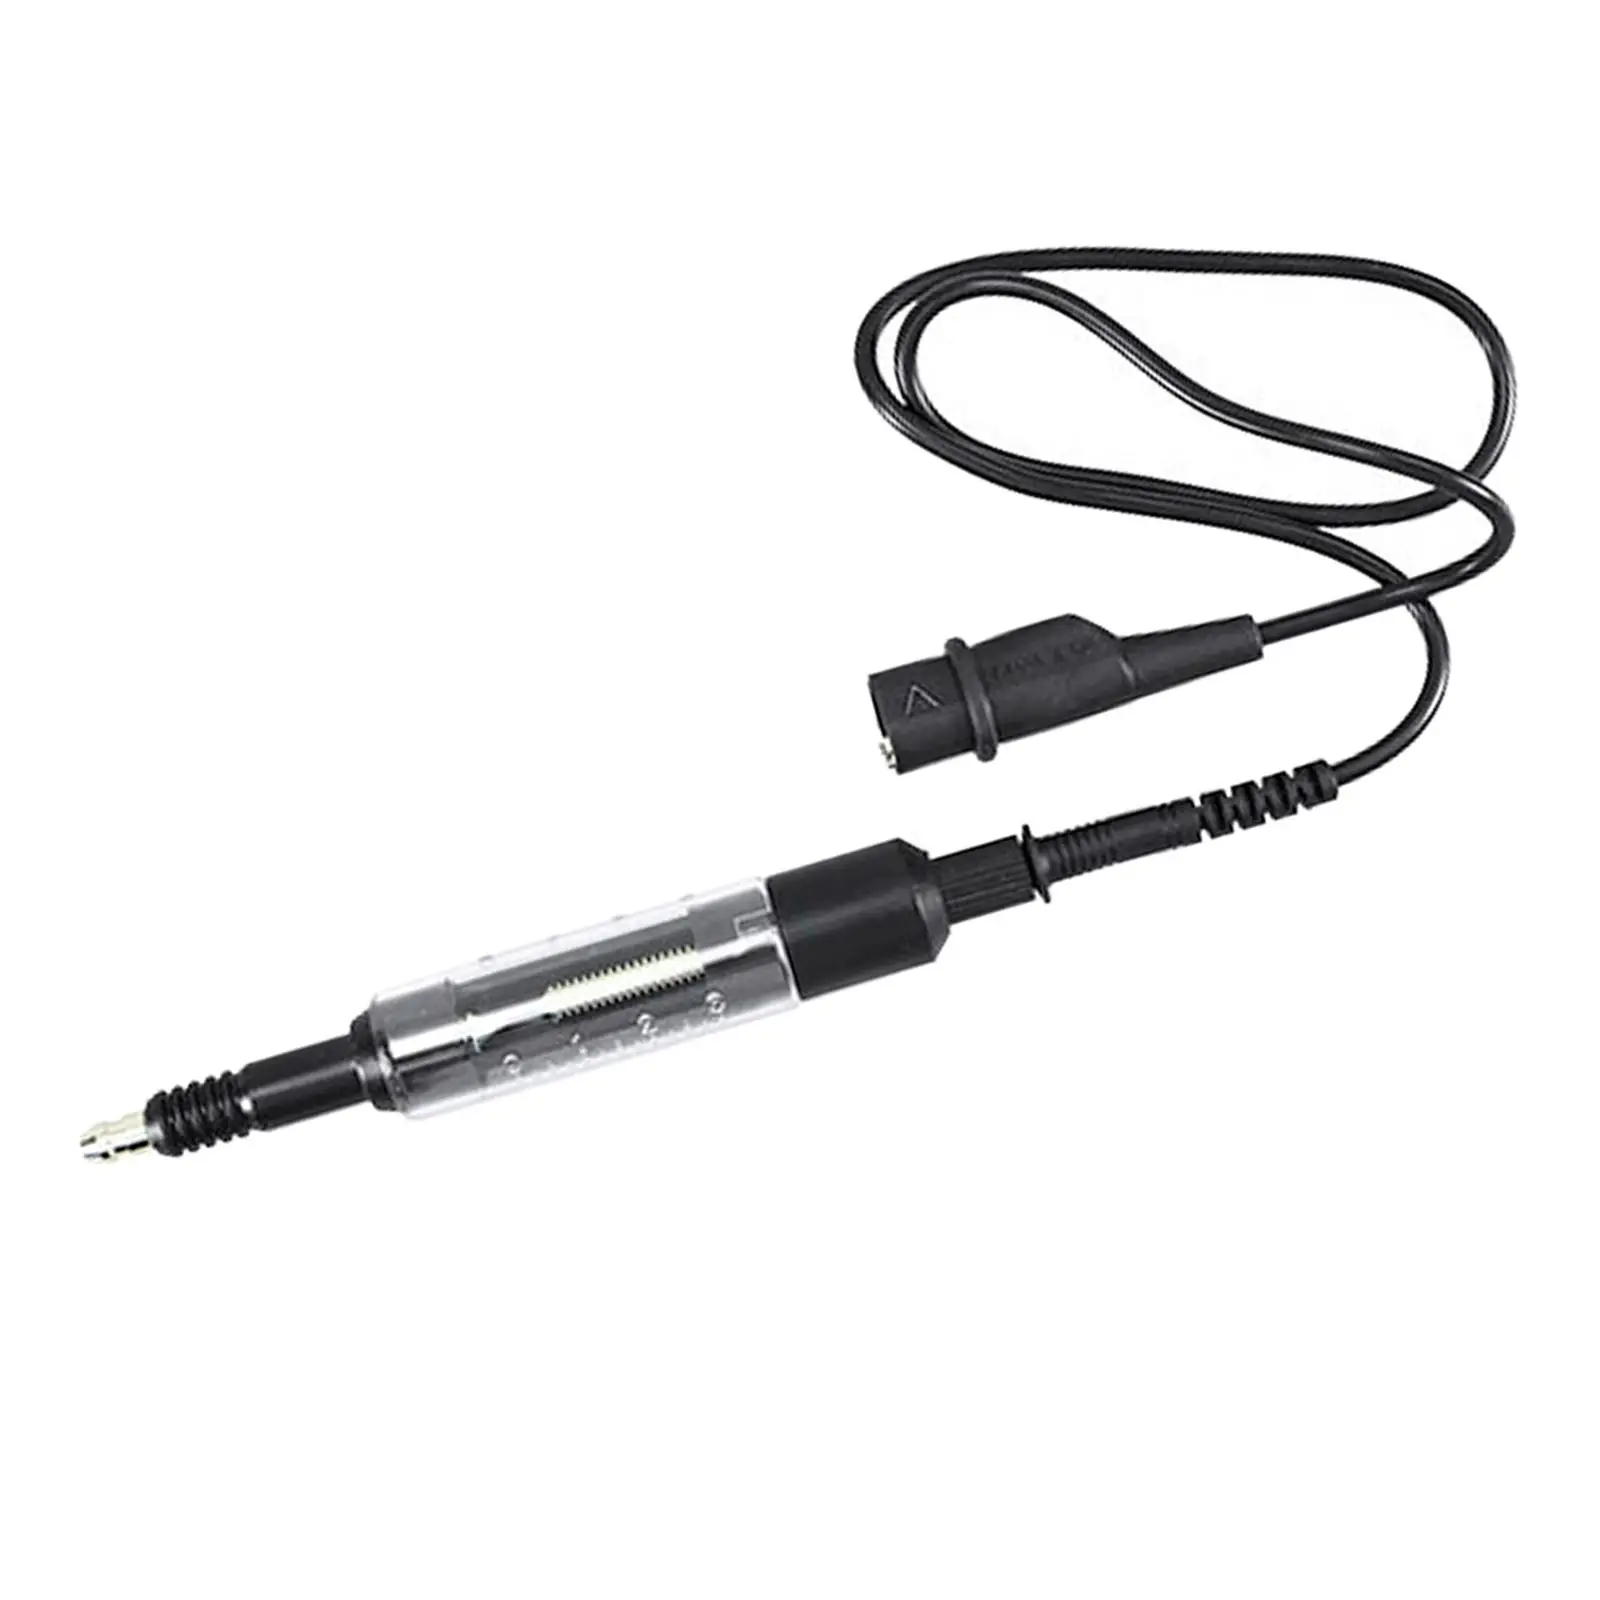 Spark Plug Tester Car Exterior Accessories Ignition Coil Tester Fit for Small & Big Internal/External Engines Lawnmower Car